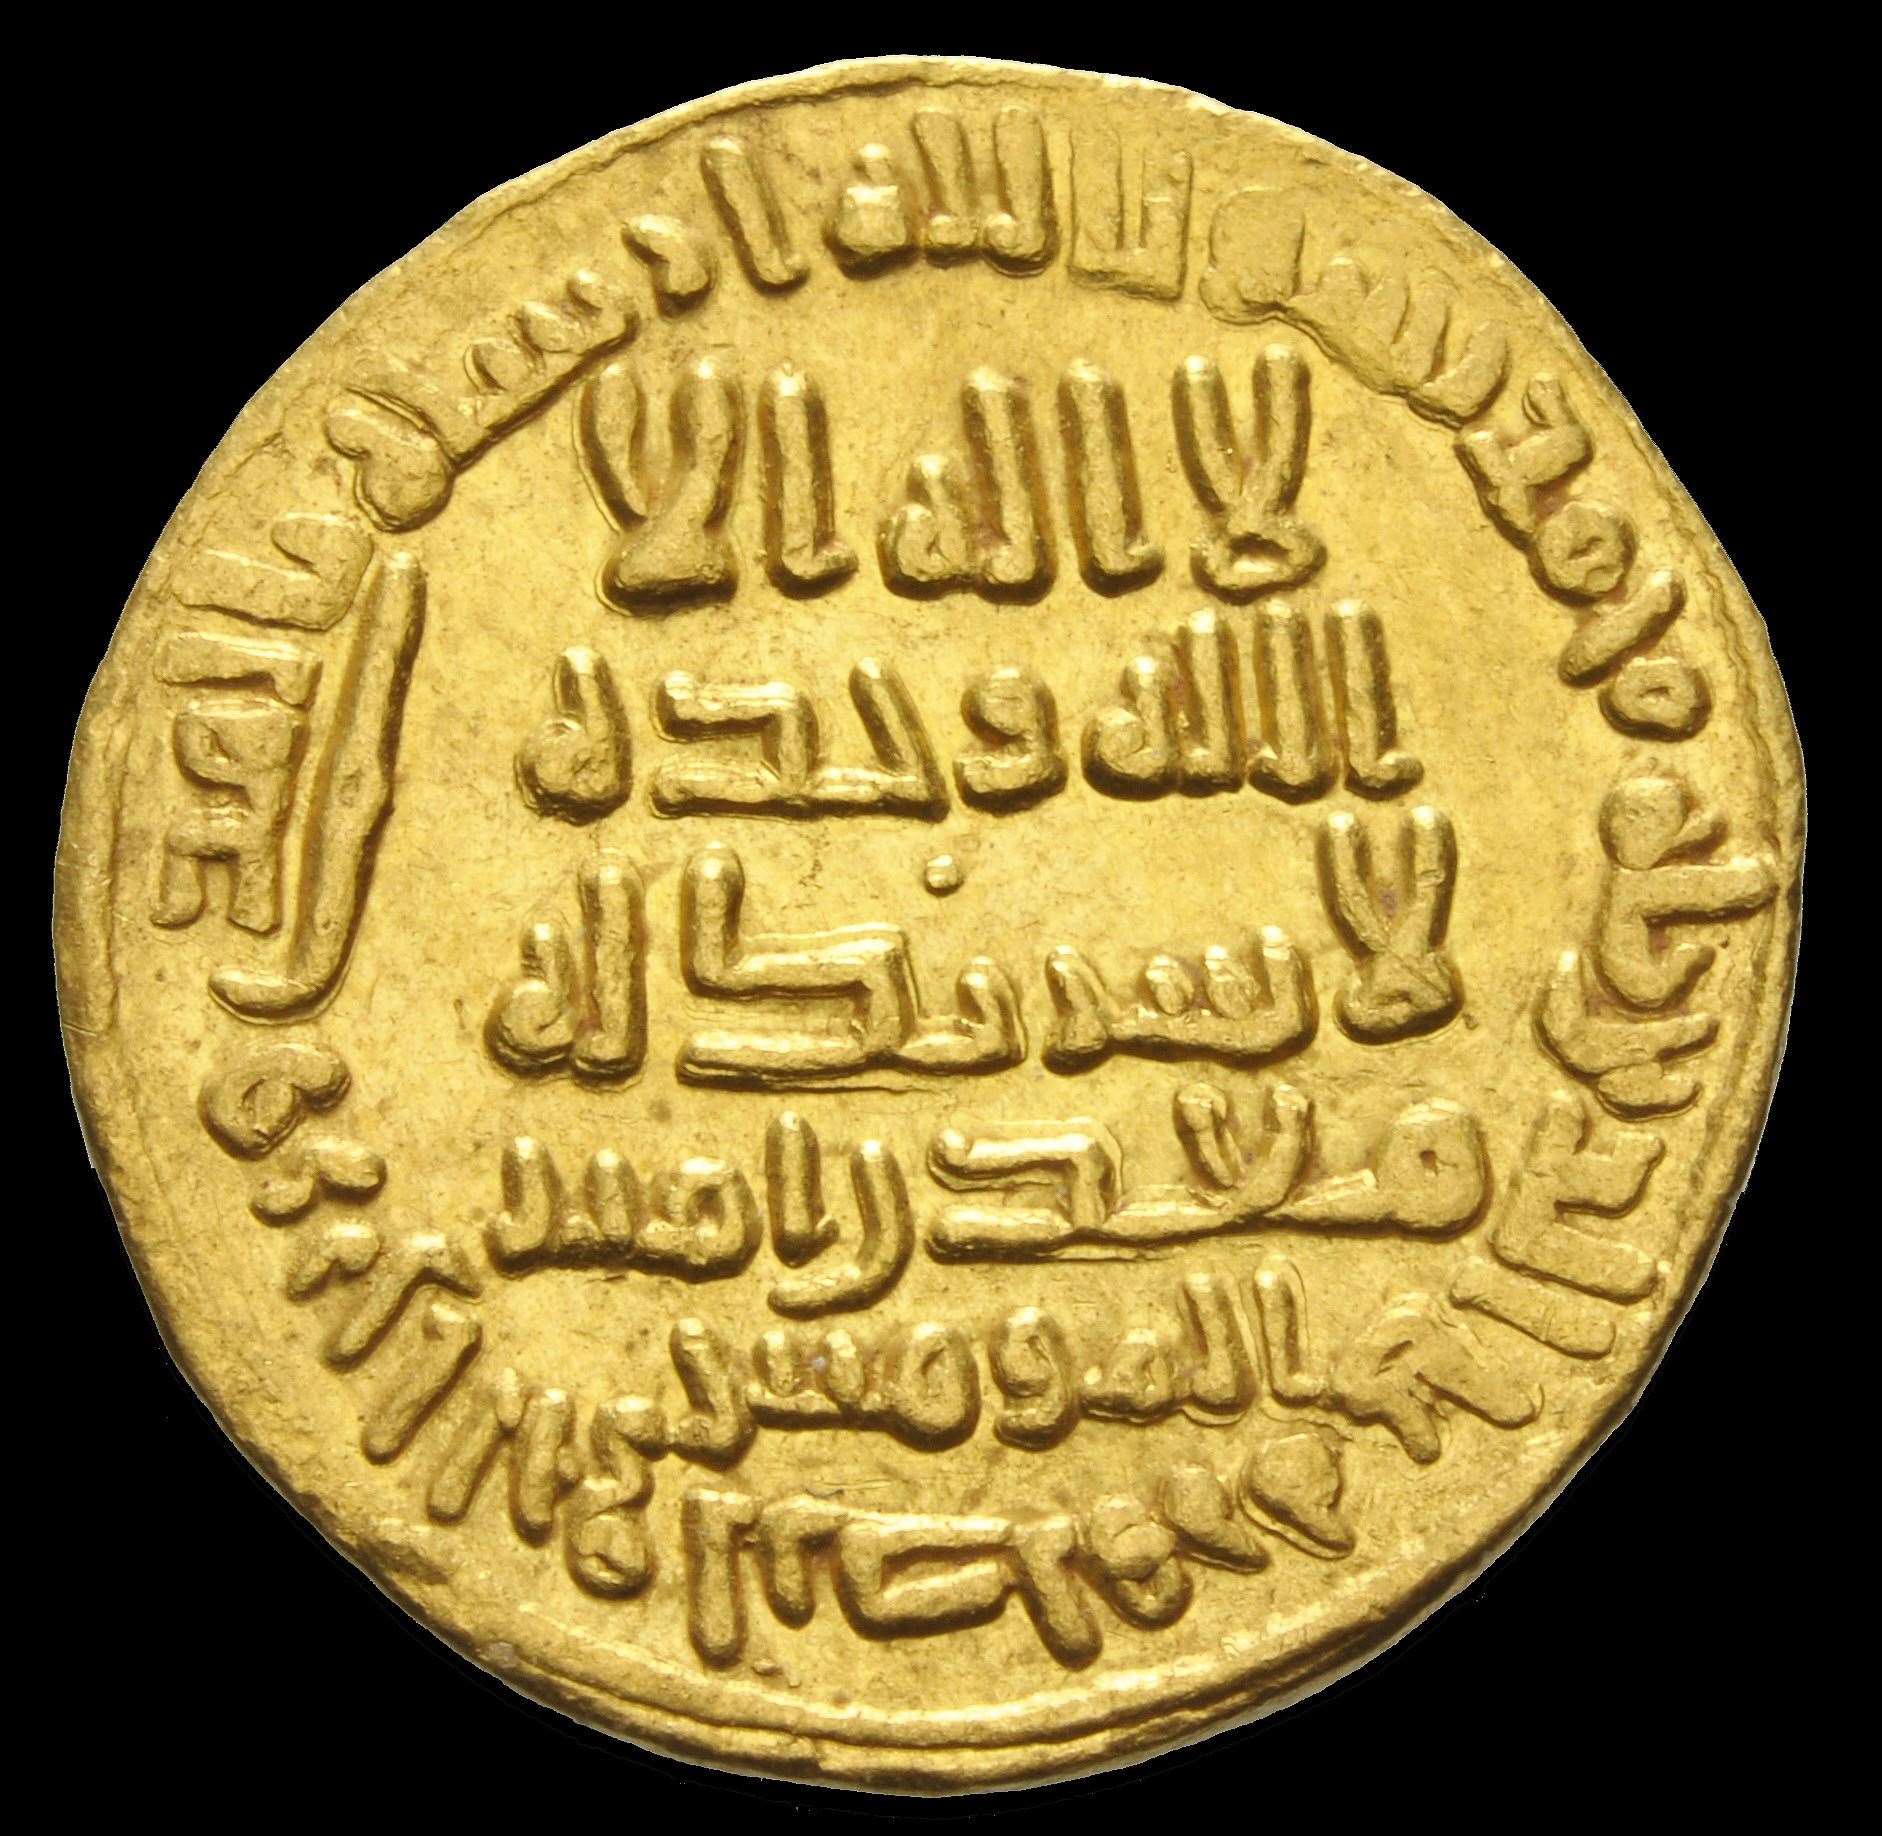 The gold dinar dates from the time of the Umayyad Caliphate (Classical Numismatic Group)